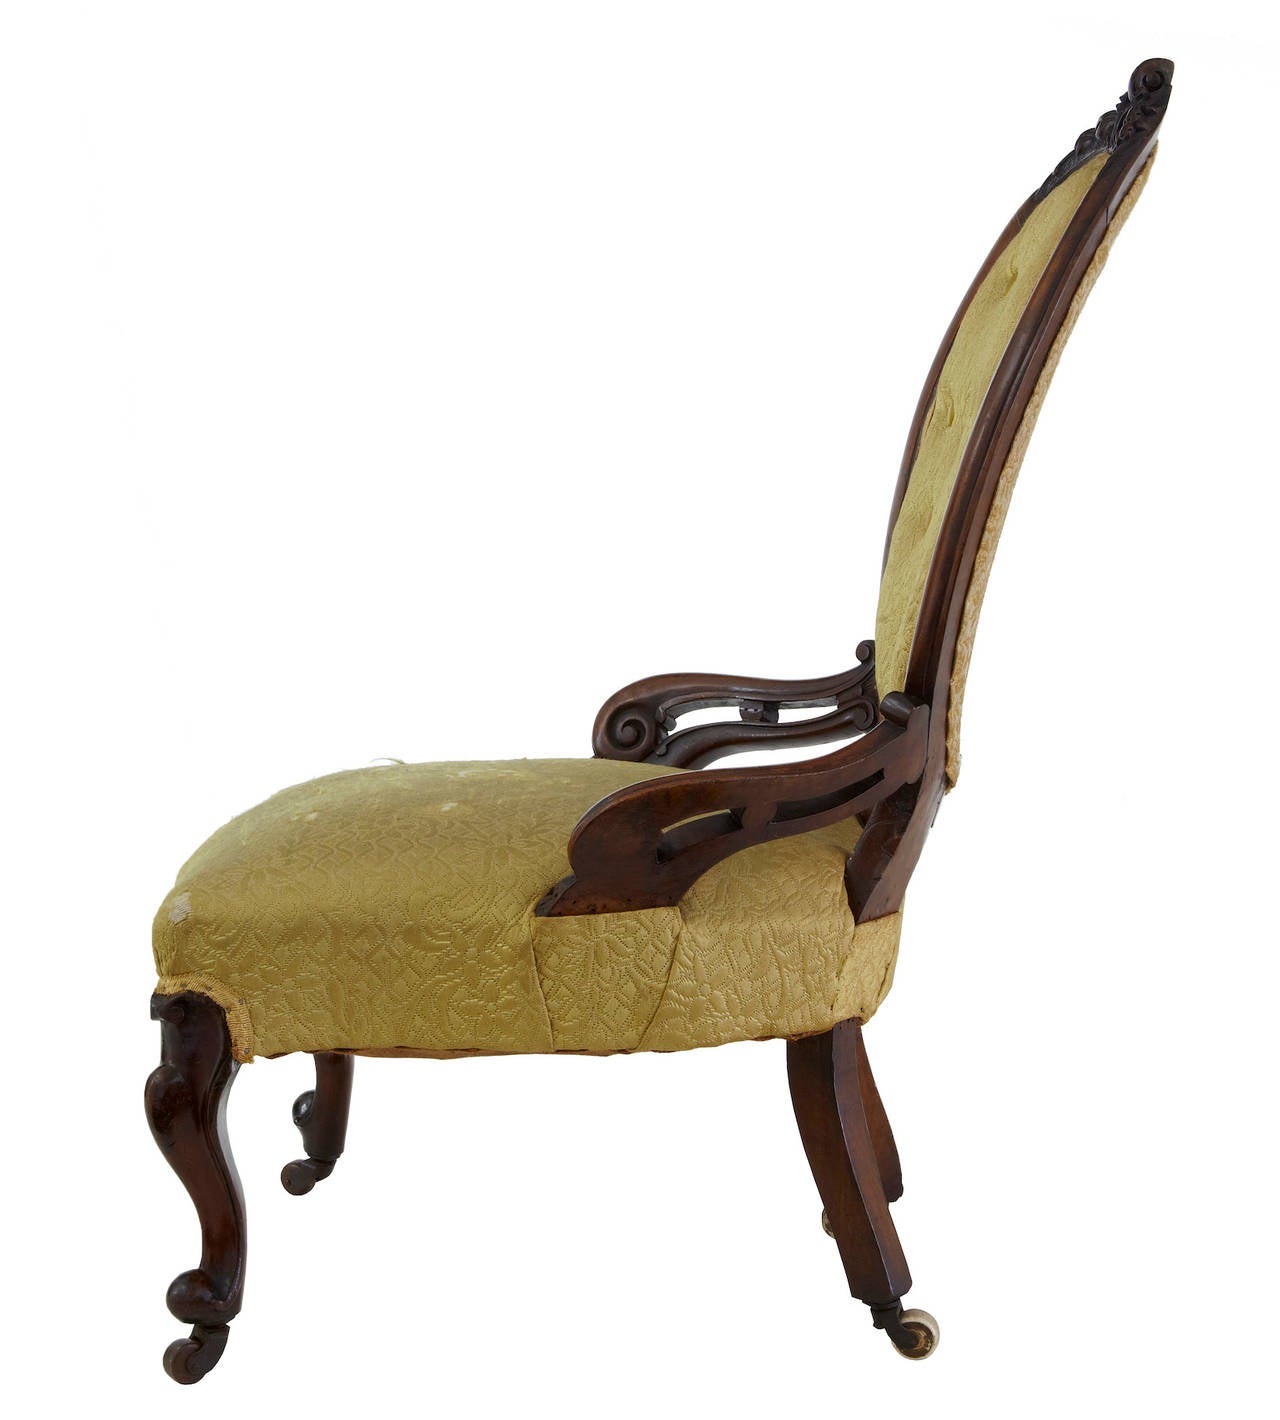 Carved mahogany nursing chair, circa 1850
Carved backrest with buttonback, carved and pierced arms.
In need of recovering but structurally sound.

Measures: Height: 37